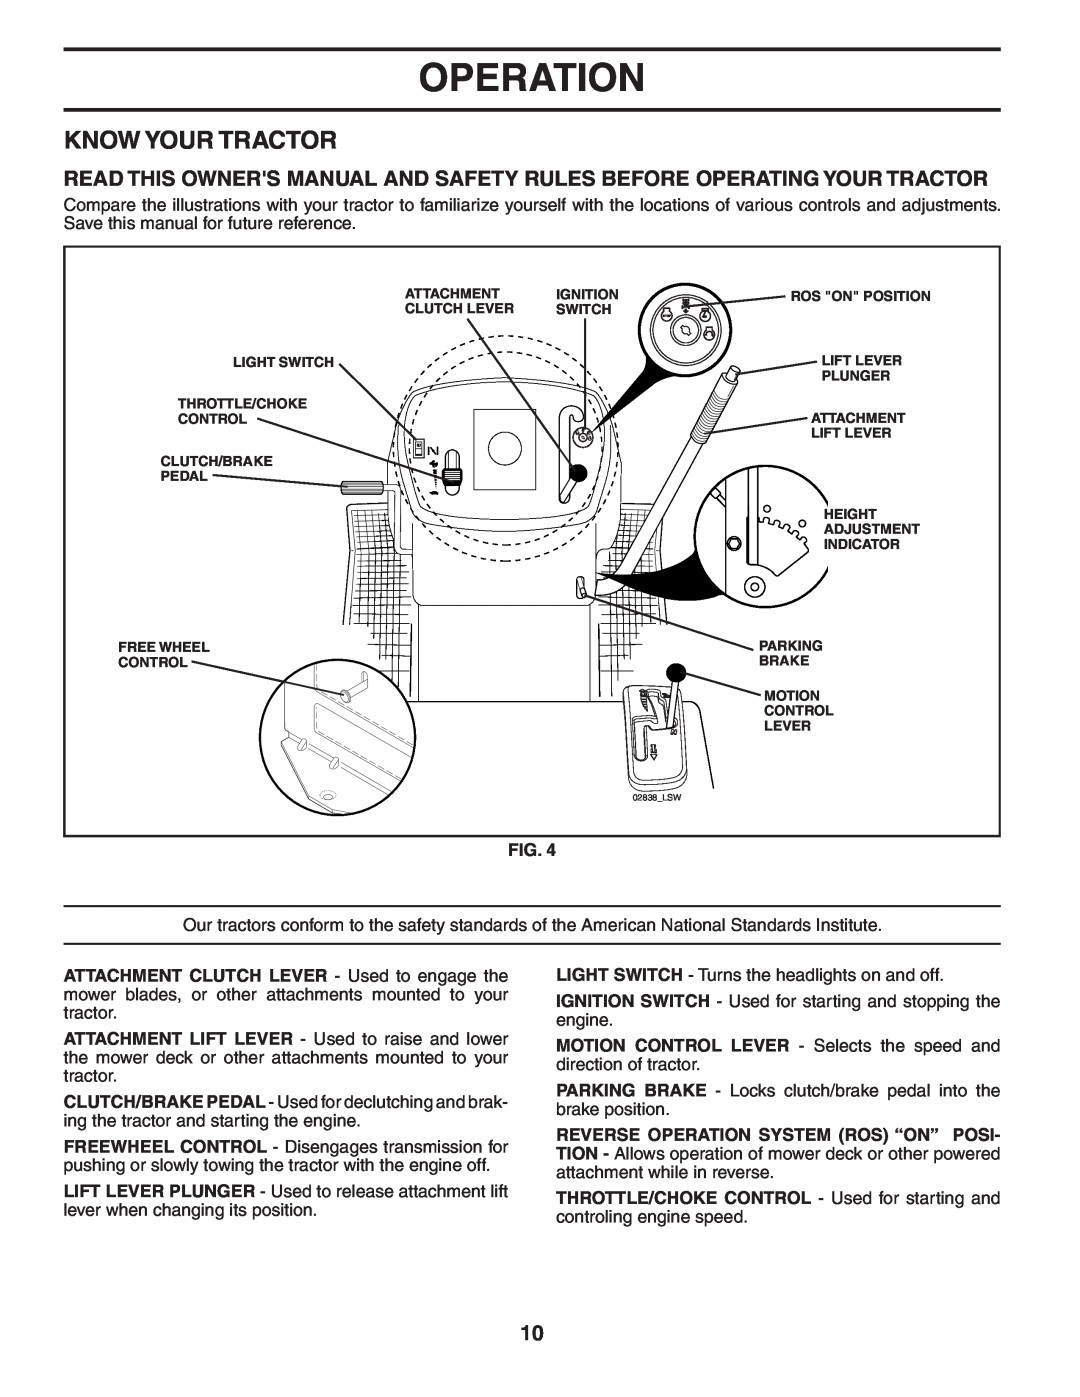 Poulan 403444 manual Know Your Tractor, Operation 